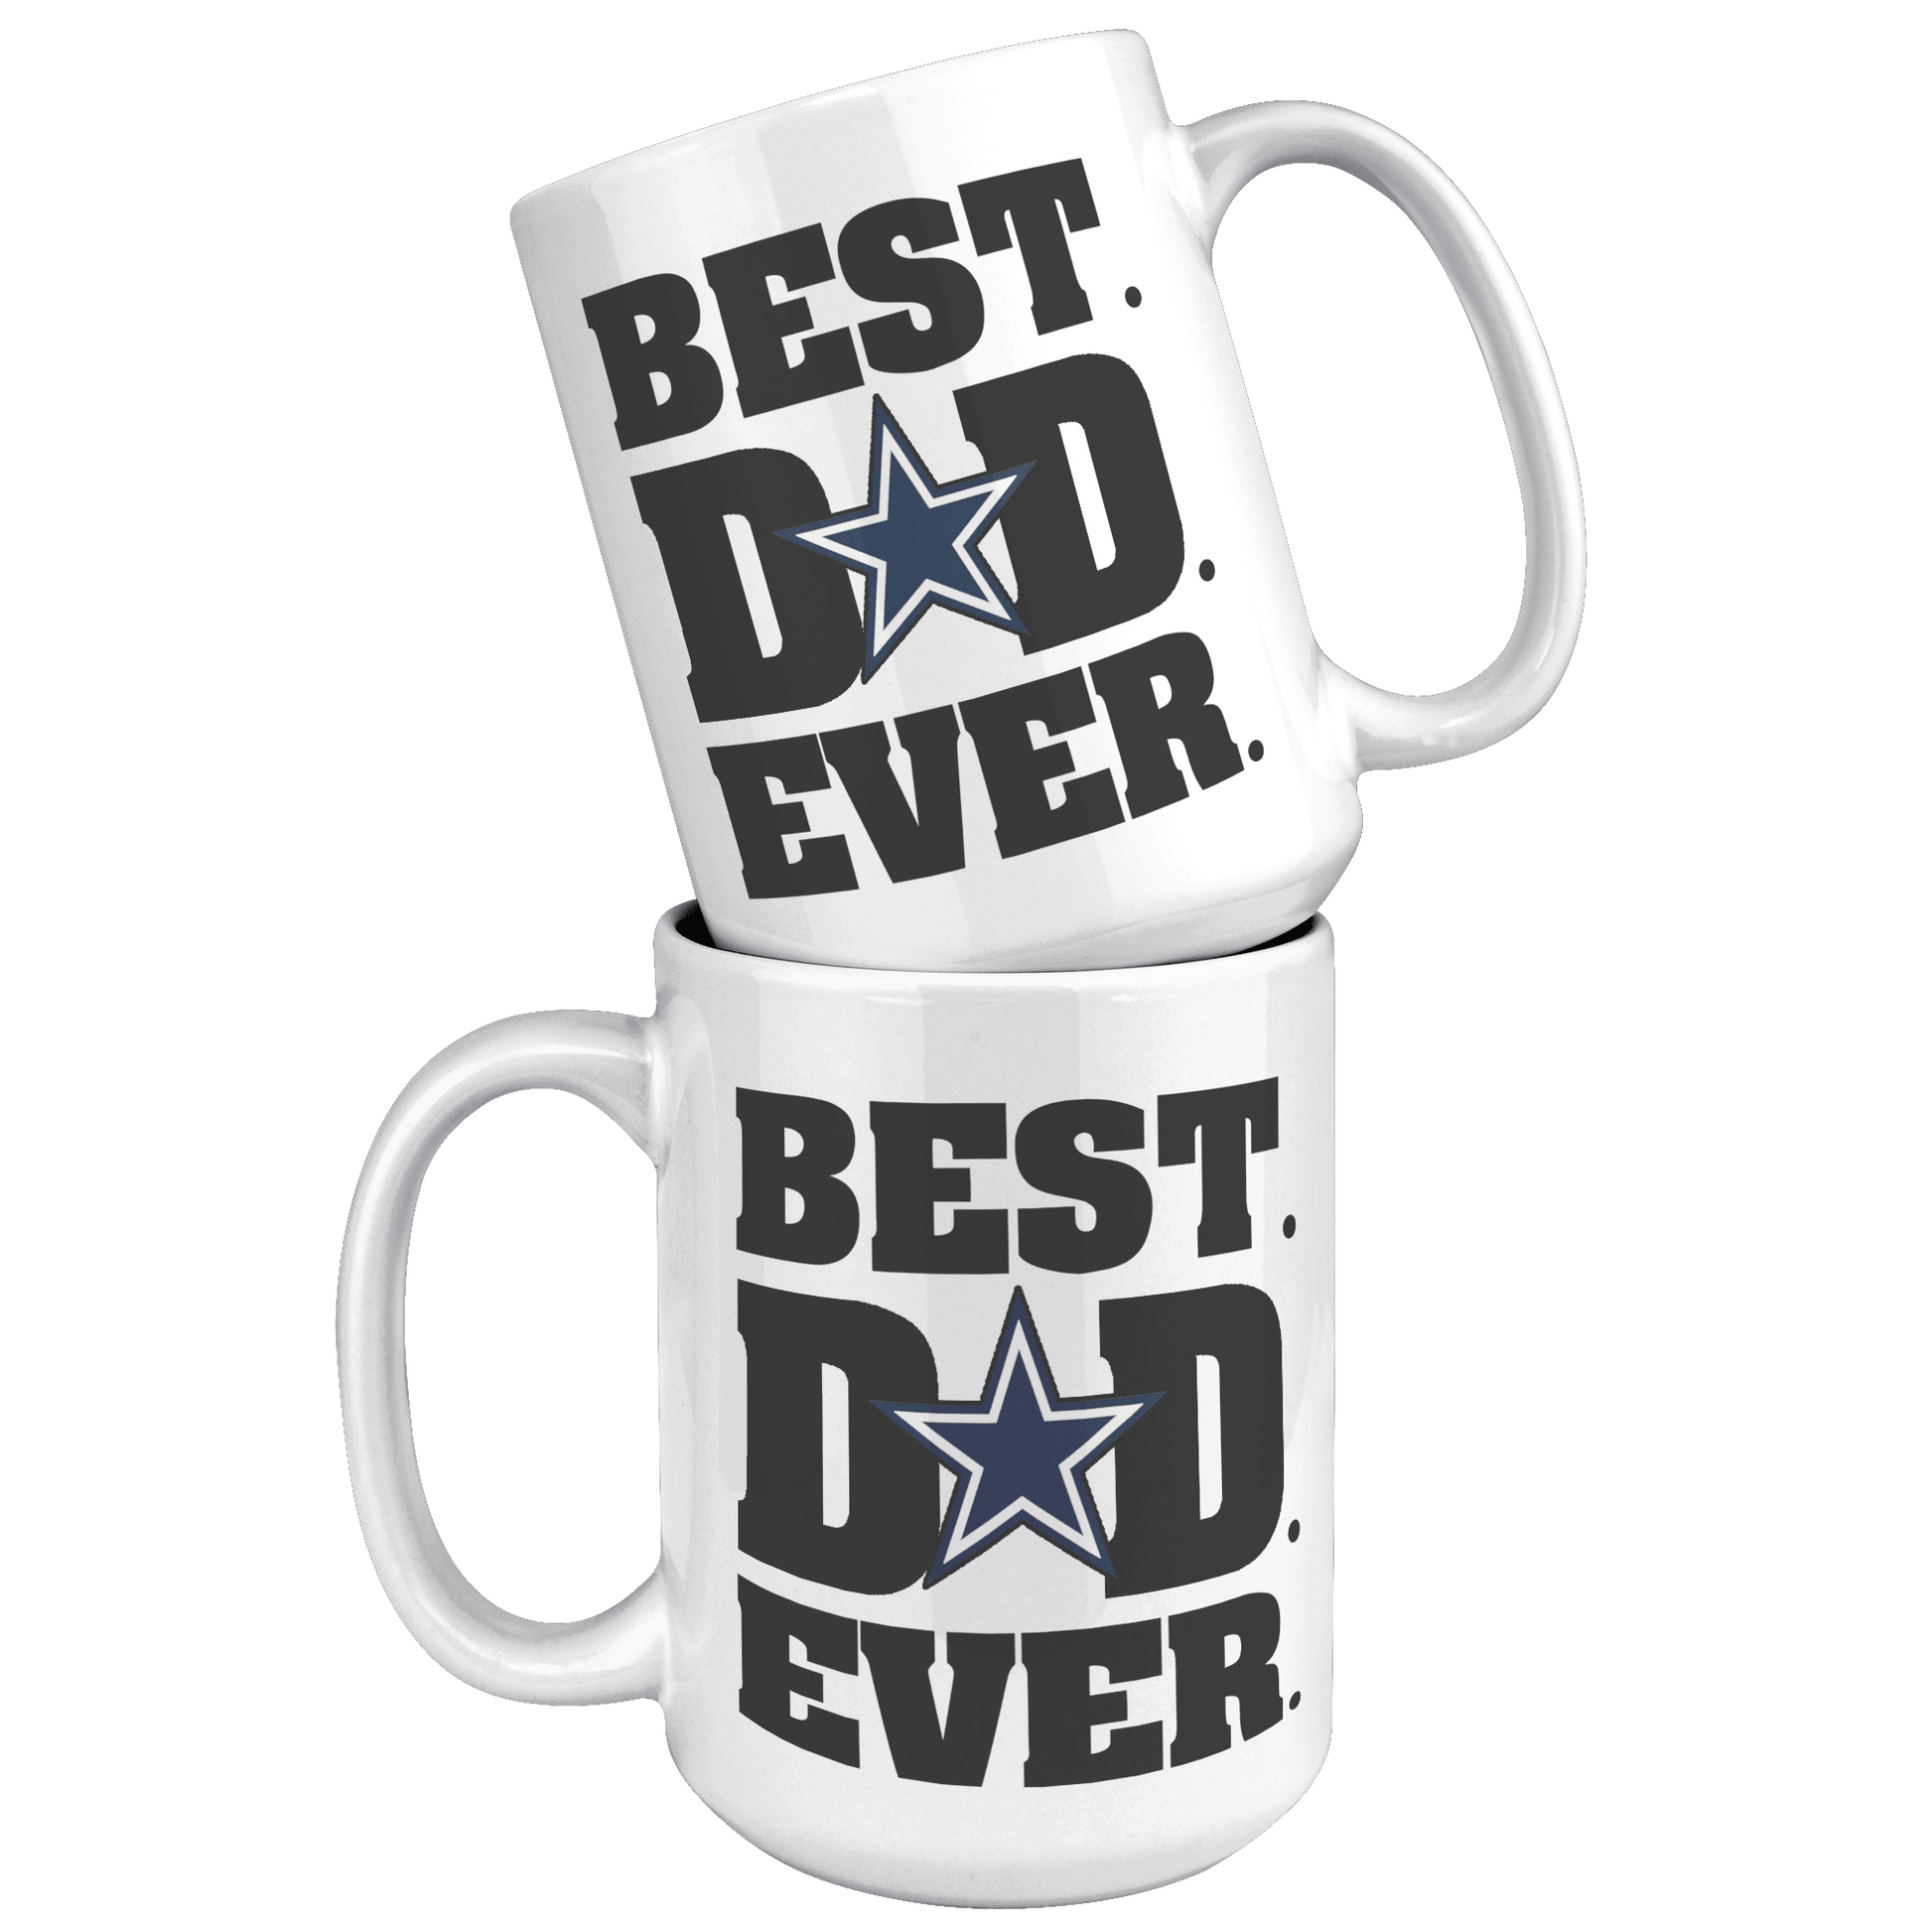 Cowboys Dad Mom Since Cup Mug, Dallas Football Inspired White Coffee Mug,  New Dad Gift, Year He Became a Dad, Football Fan Baby Reveal Item 